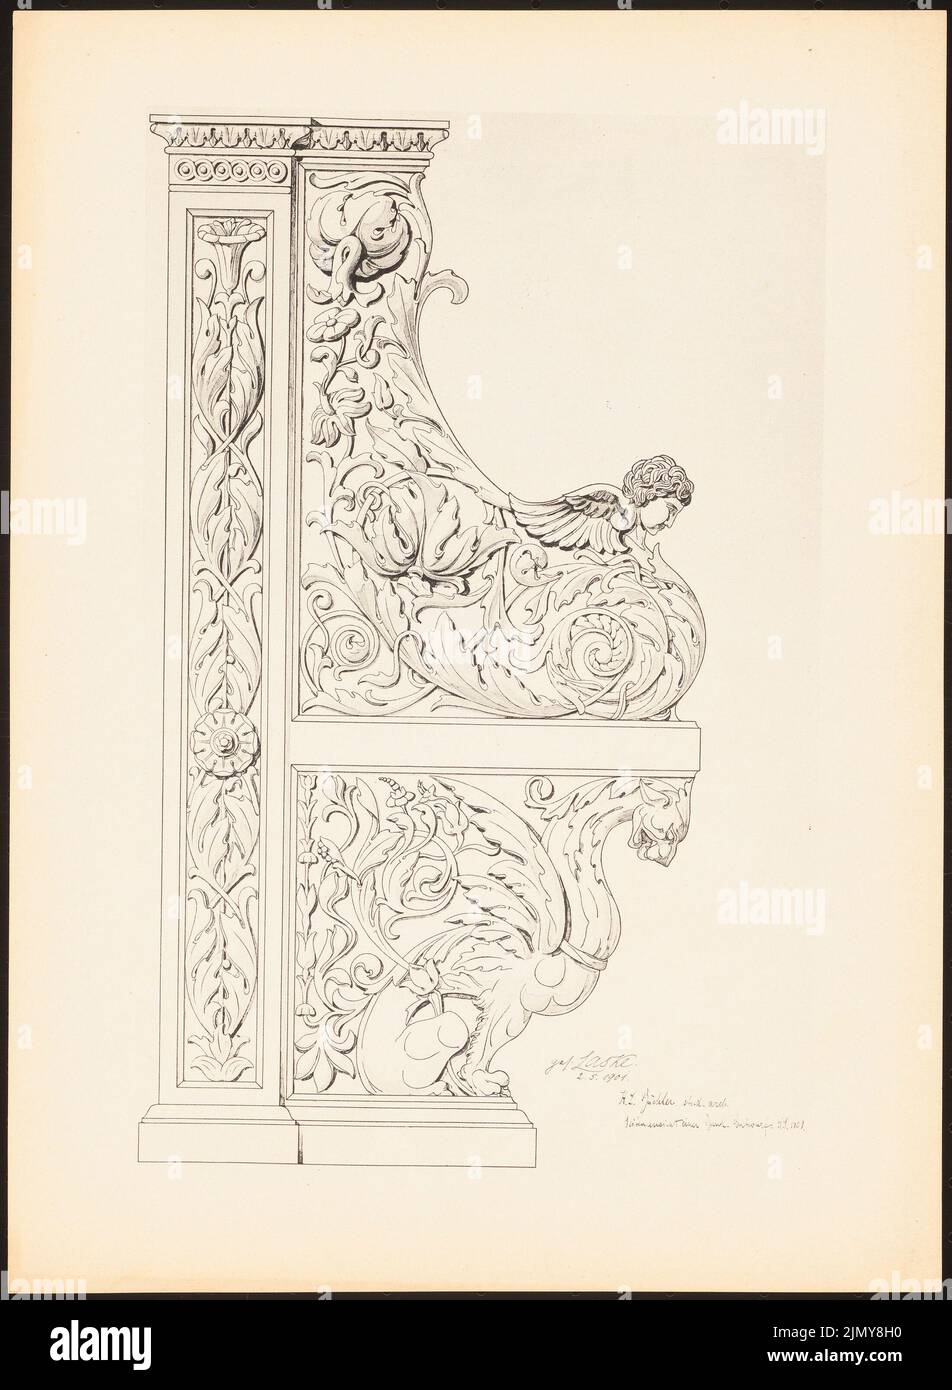 Büchler H. L., Bank. (From: Prints of seminar works by the Royal Technical University of Berlin, Vol. II) (02.05.1901): Side view. Print on paper, 33.2 x 24.3 cm (including scan edges) Stock Photo